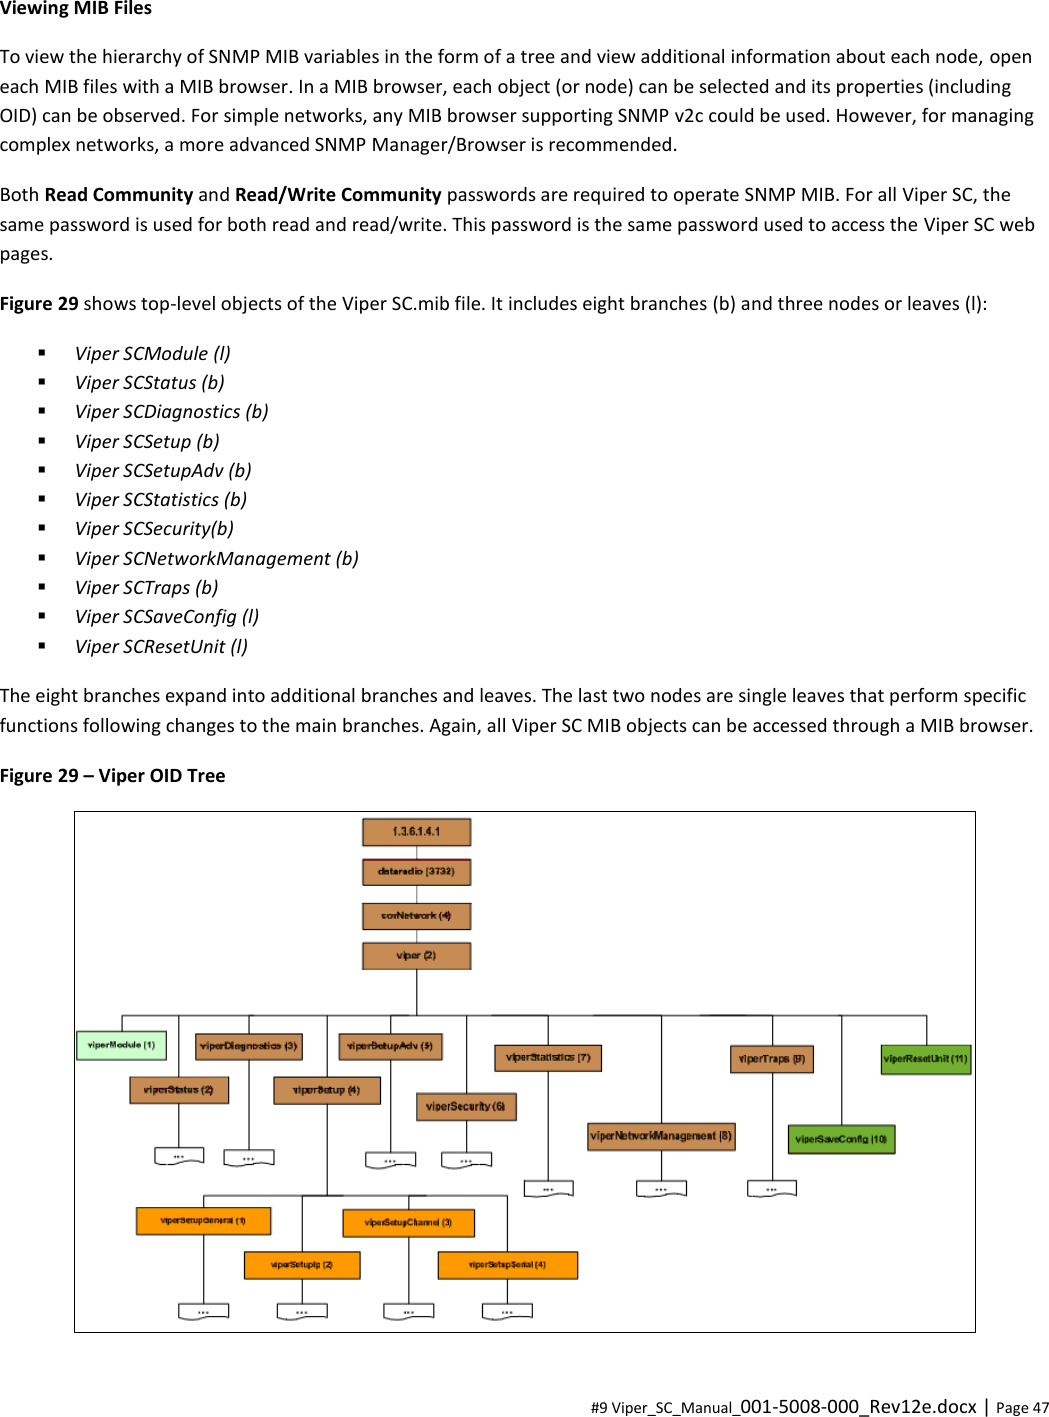  #9 Viper_SC_Manual_001-5008-000_Rev12e.docx | Page 47 Viewing MIB Files To view the hierarchy of SNMP MIB variables in the form of a tree and view additional information about each node, open each MIB files with a MIB browser. In a MIB browser, each object (or node) can be selected and its properties (including OID) can be observed. For simple networks, any MIB browser supporting SNMP v2c could be used. However, for managing complex networks, a more advanced SNMP Manager/Browser is recommended. Both Read Community and Read/Write Community passwords are required to operate SNMP MIB. For all Viper SC, the same password is used for both read and read/write. This password is the same password used to access the Viper SC web pages. Figure 29 shows top-level objects of the Viper SC.mib file. It includes eight branches (b) and three nodes or leaves (l):  Viper SCModule (l)  Viper SCStatus (b)  Viper SCDiagnostics (b)  Viper SCSetup (b)  Viper SCSetupAdv (b)  Viper SCStatistics (b)  Viper SCSecurity(b)  Viper SCNetworkManagement (b)  Viper SCTraps (b)  Viper SCSaveConfig (l)  Viper SCResetUnit (l) The eight branches expand into additional branches and leaves. The last two nodes are single leaves that perform specific functions following changes to the main branches. Again, all Viper SC MIB objects can be accessed through a MIB browser. Figure 29 – Viper OID Tree  